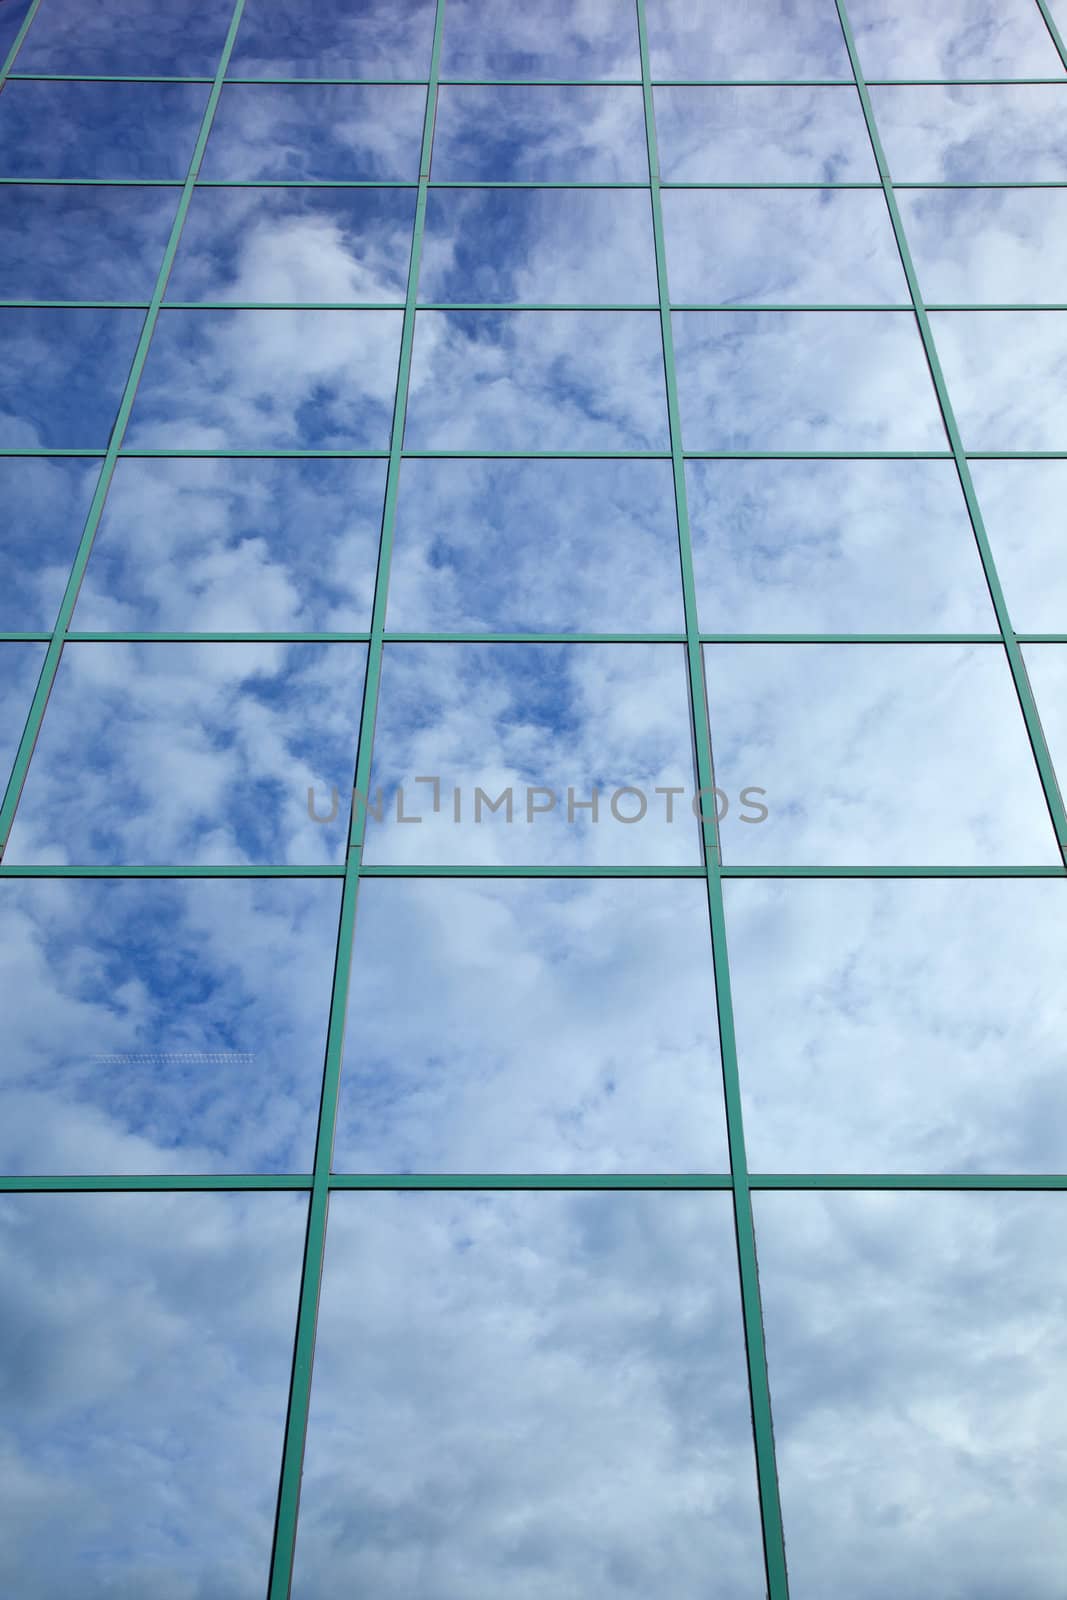 clouds and blue sky reflected in glass facade by ahavelaar